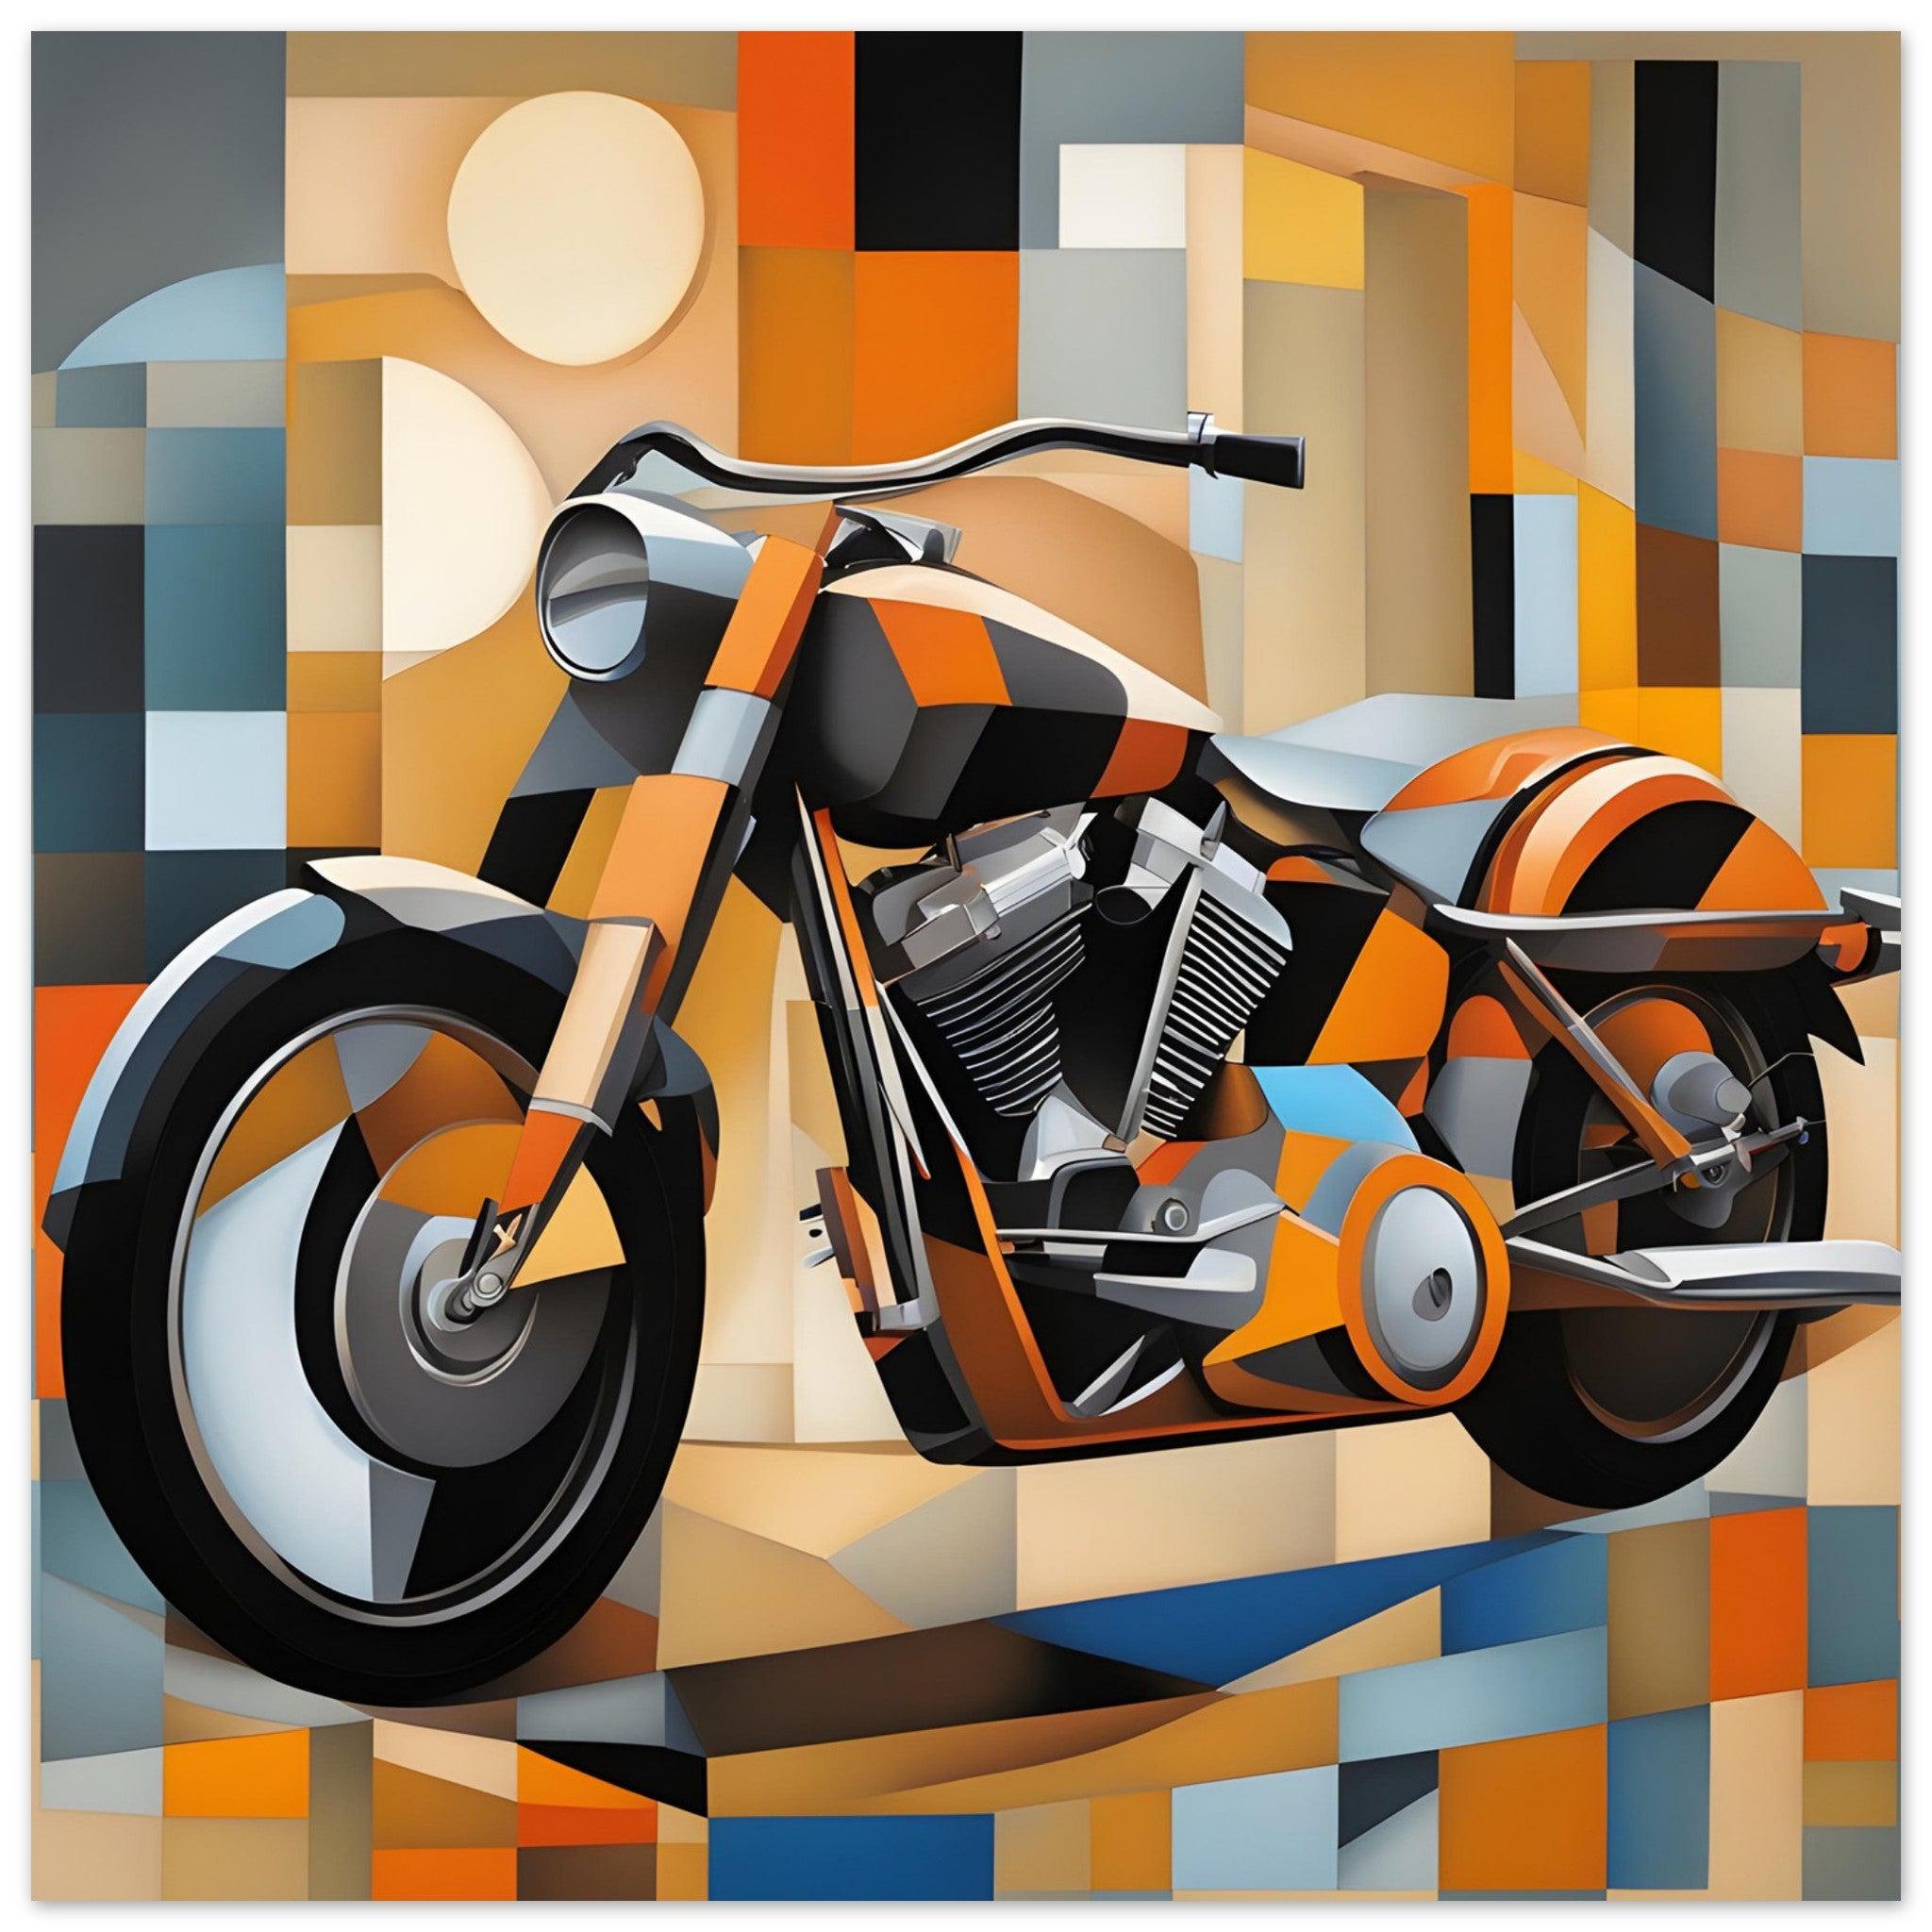 Classic American Motorbike By Reflectapix - Kitchen Art Wall Decor, Unique Cubist Art, Collectable Show Stopper, Homeowners Gift